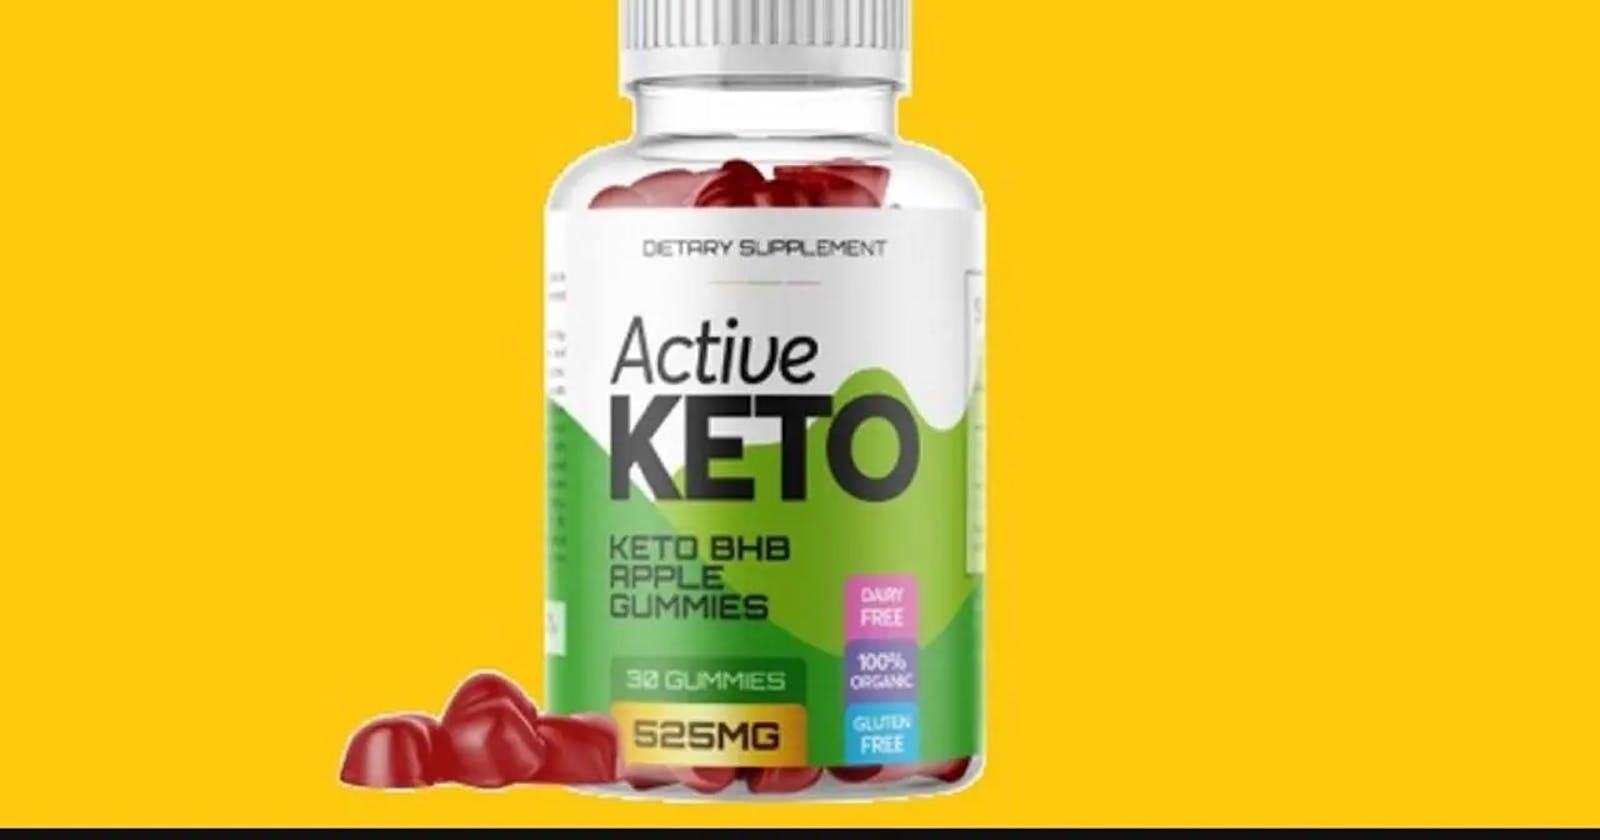 Mayo Clinic Keto Diet - [TOP RATED] "Reviews" Real Price?